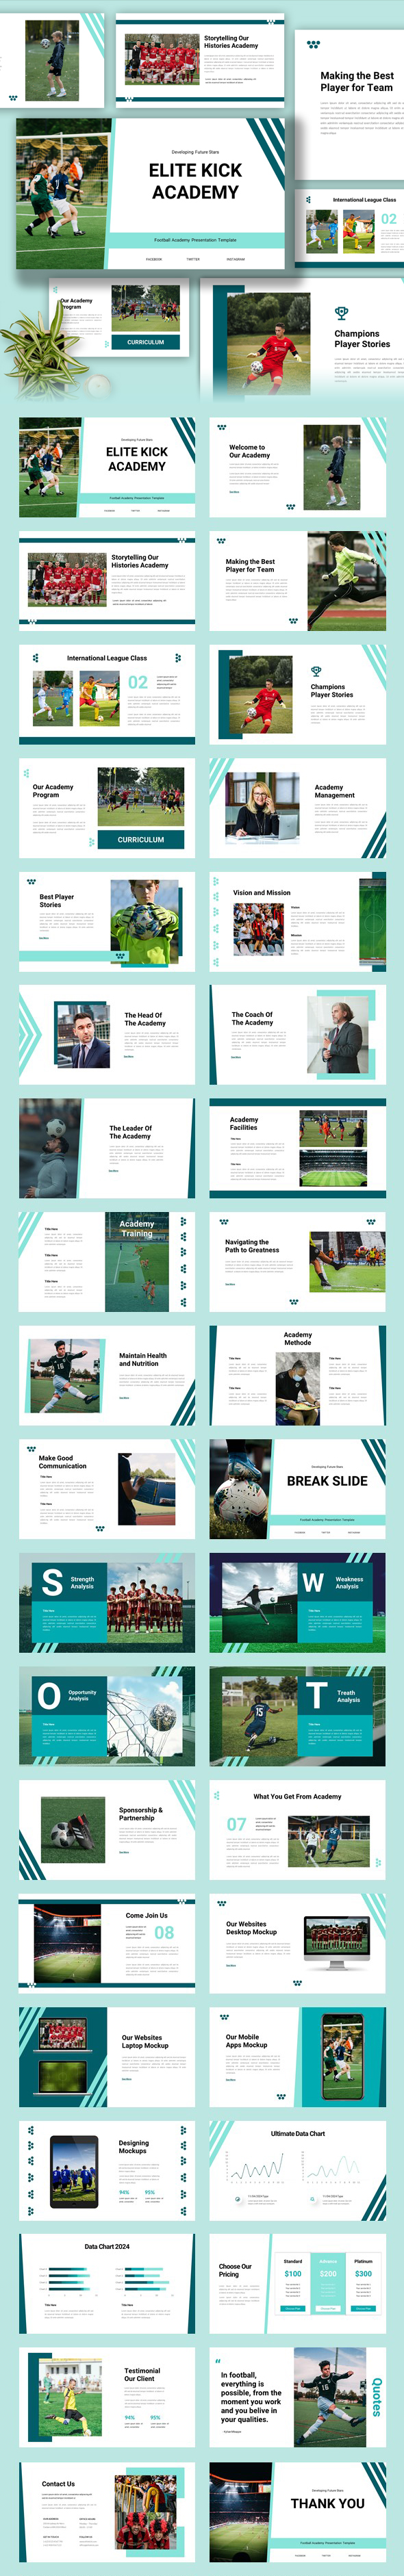 [DOWNLOAD]Elite - Football Academy PowerPoint Template